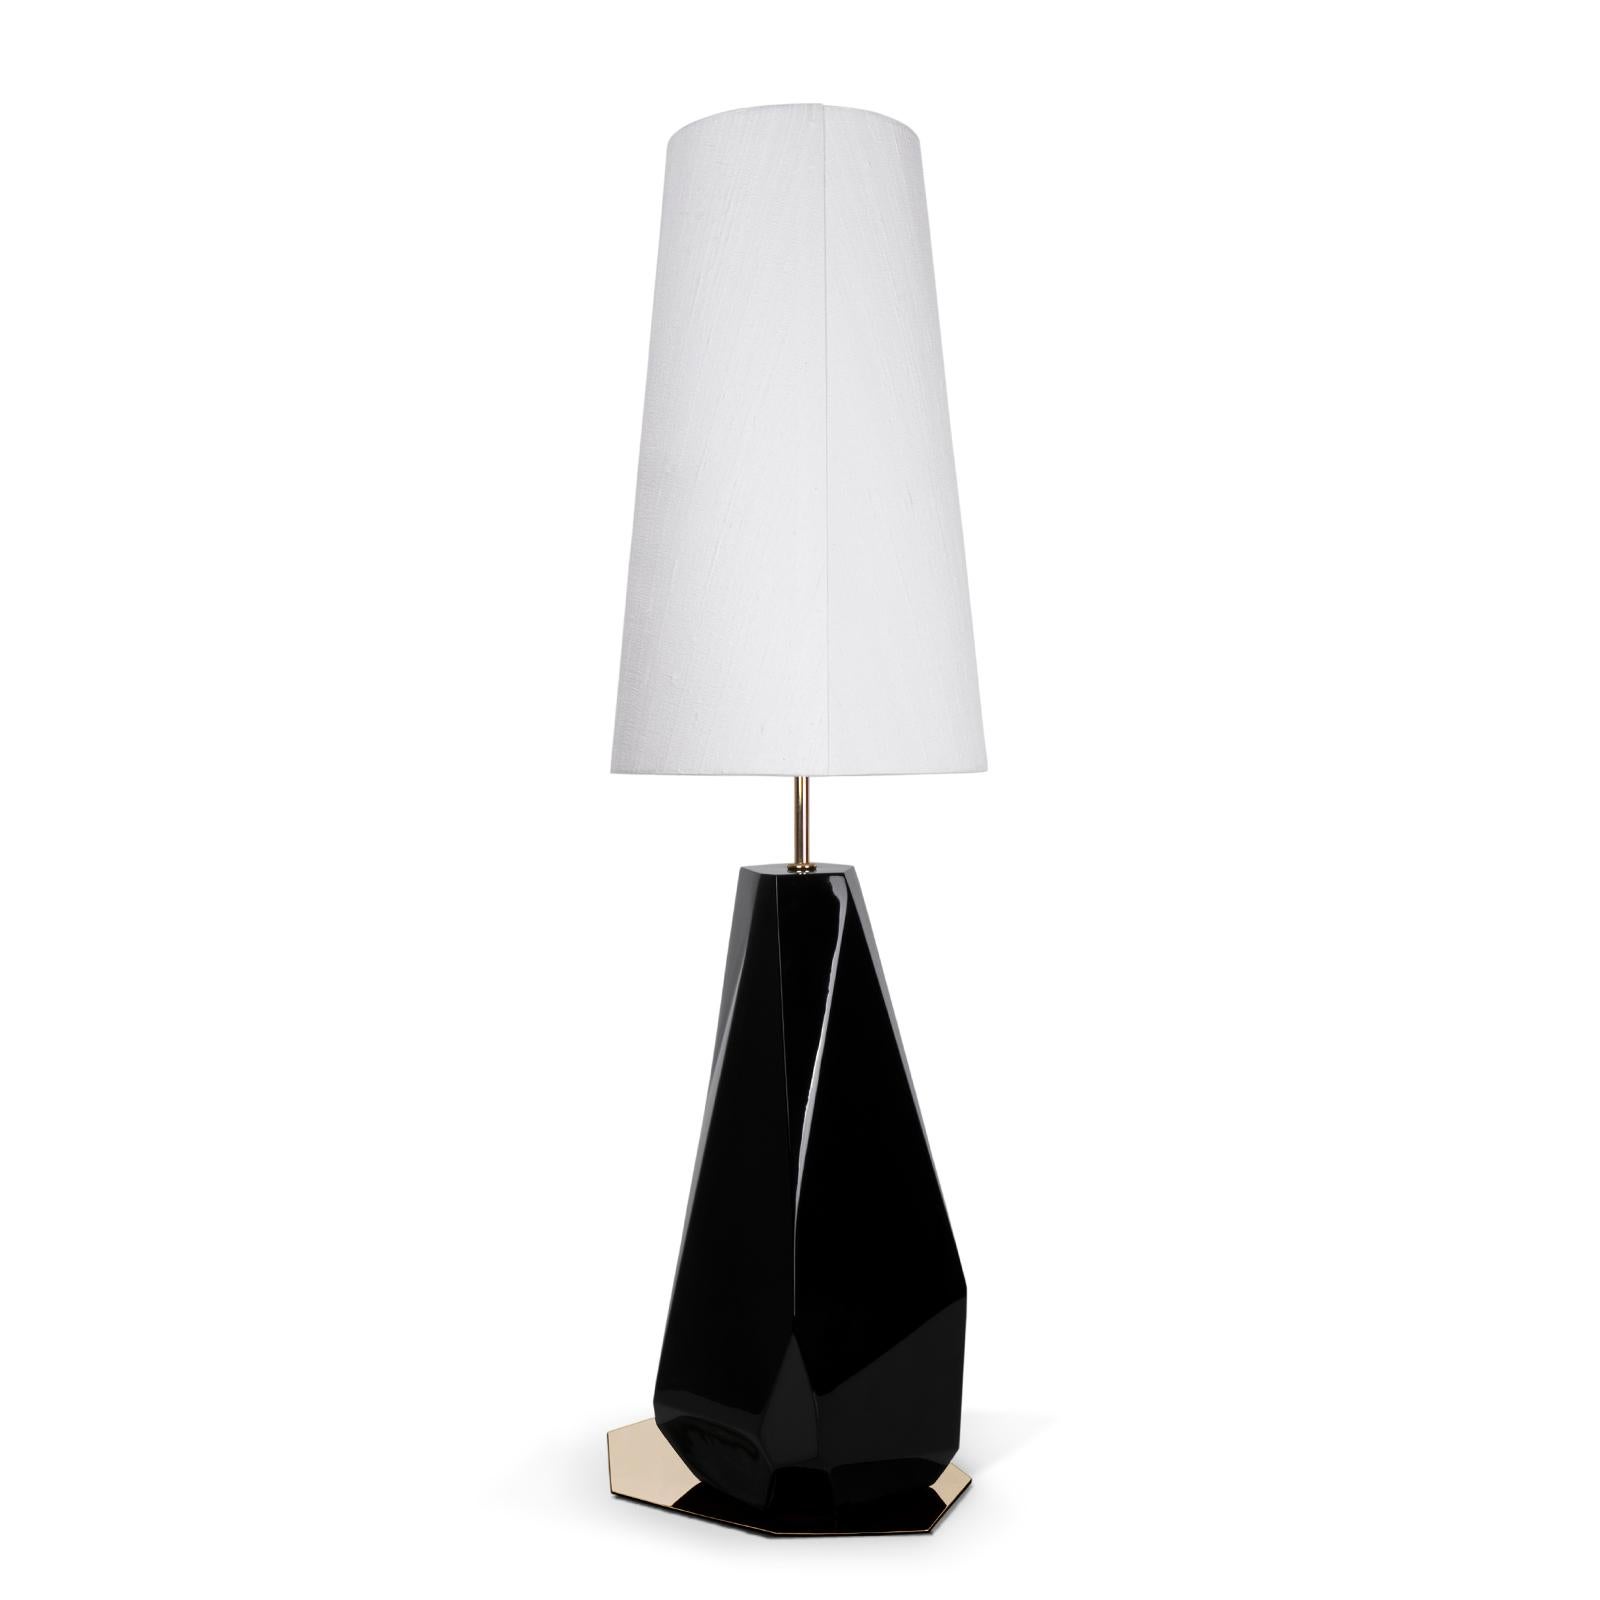 Table lamp Daytona with fiber glass base
in black lacquered finish with stainless steel
base plate and lamp holder. With a white silk
shade. 1 bulb, lamp holder type E27, max 40 watts,
bulb not included.
Measures: Table lamp diameter 30 cm,